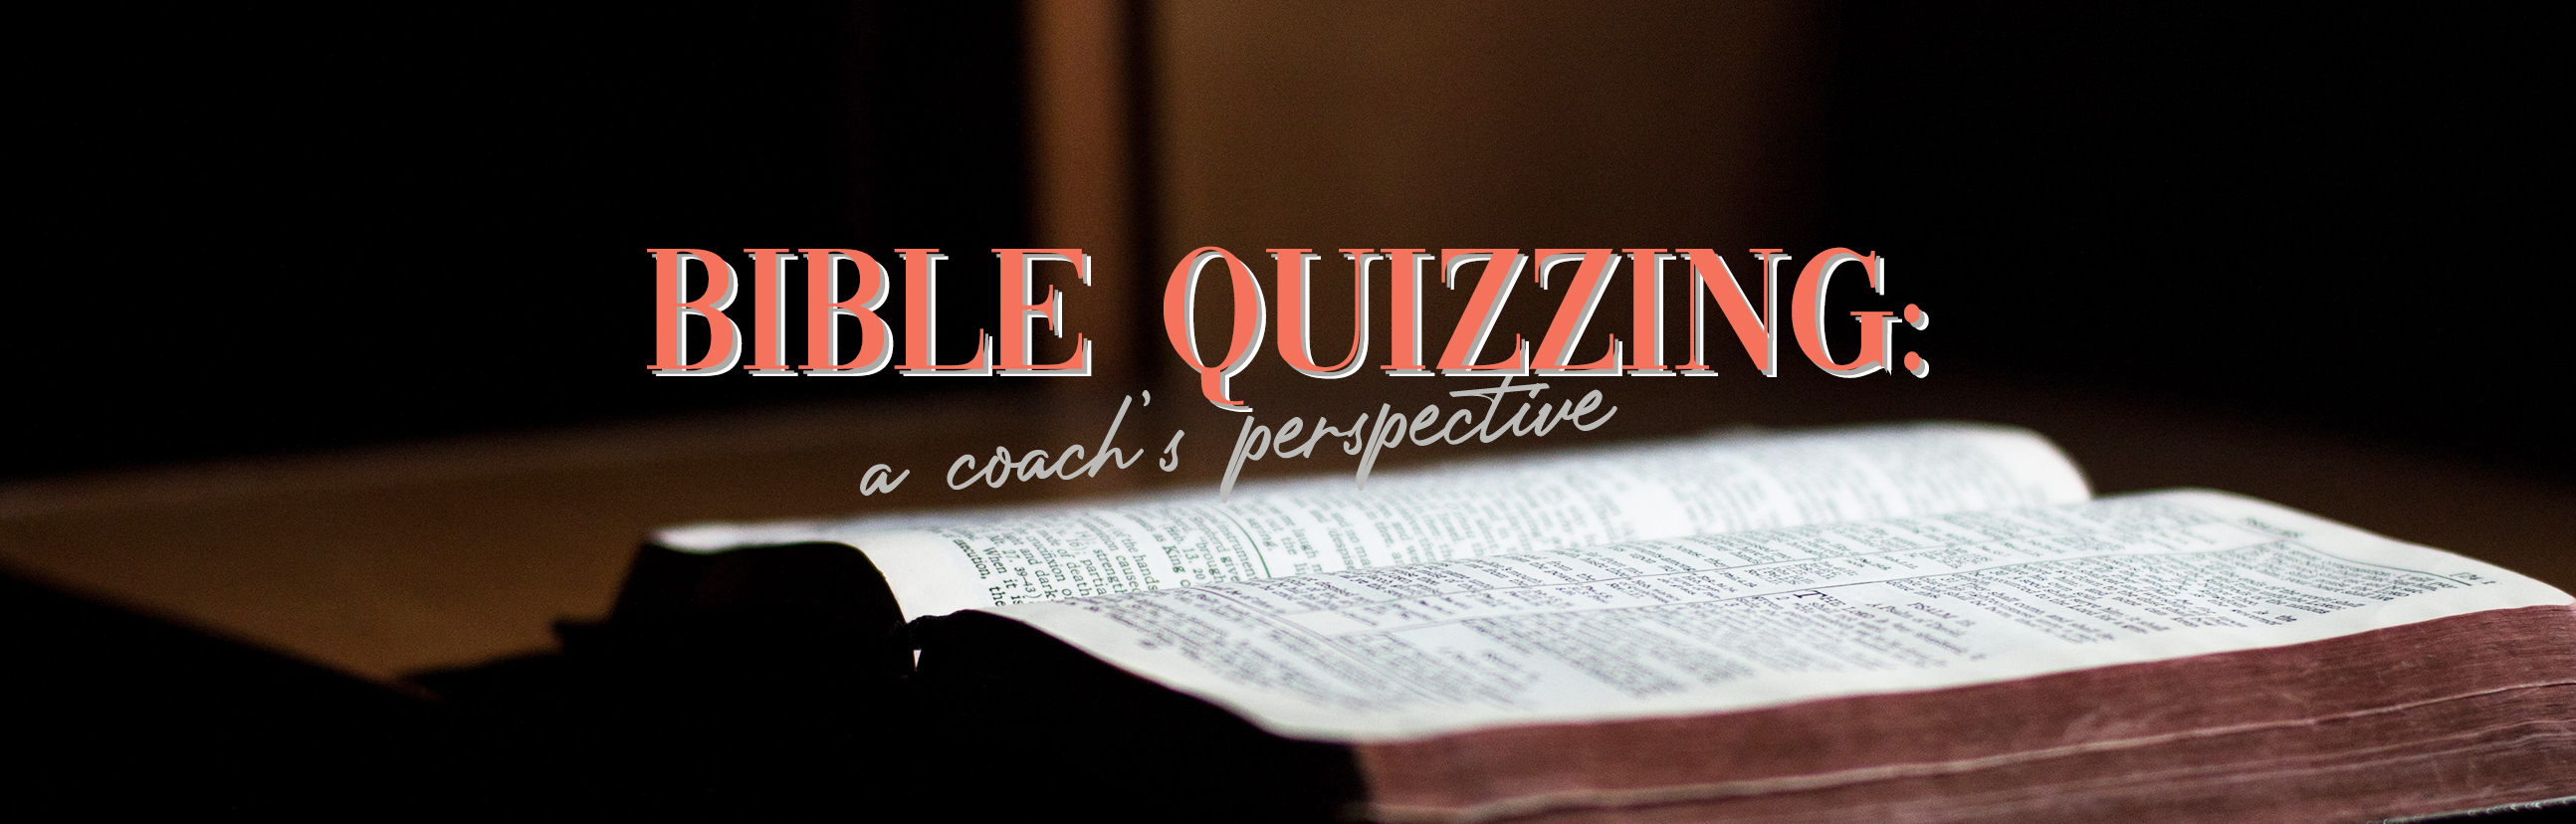 Bible Quizzing: A Coach's Perspective